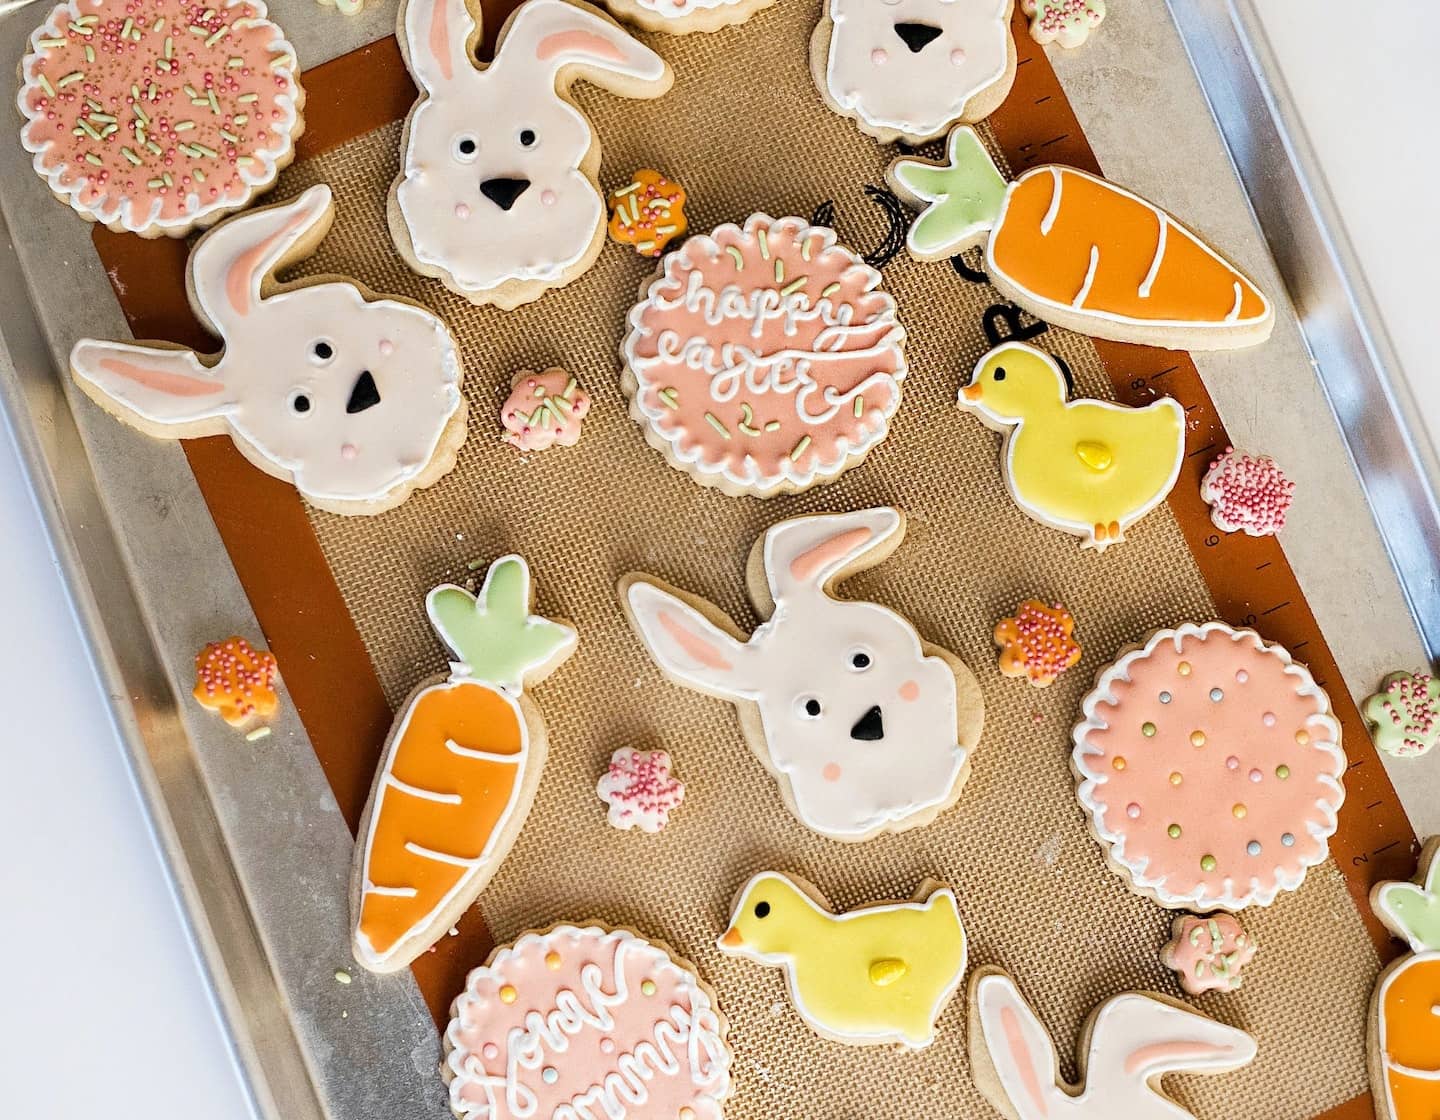 Easter Recipes: Quick And Easy Treats To Make With The Kids